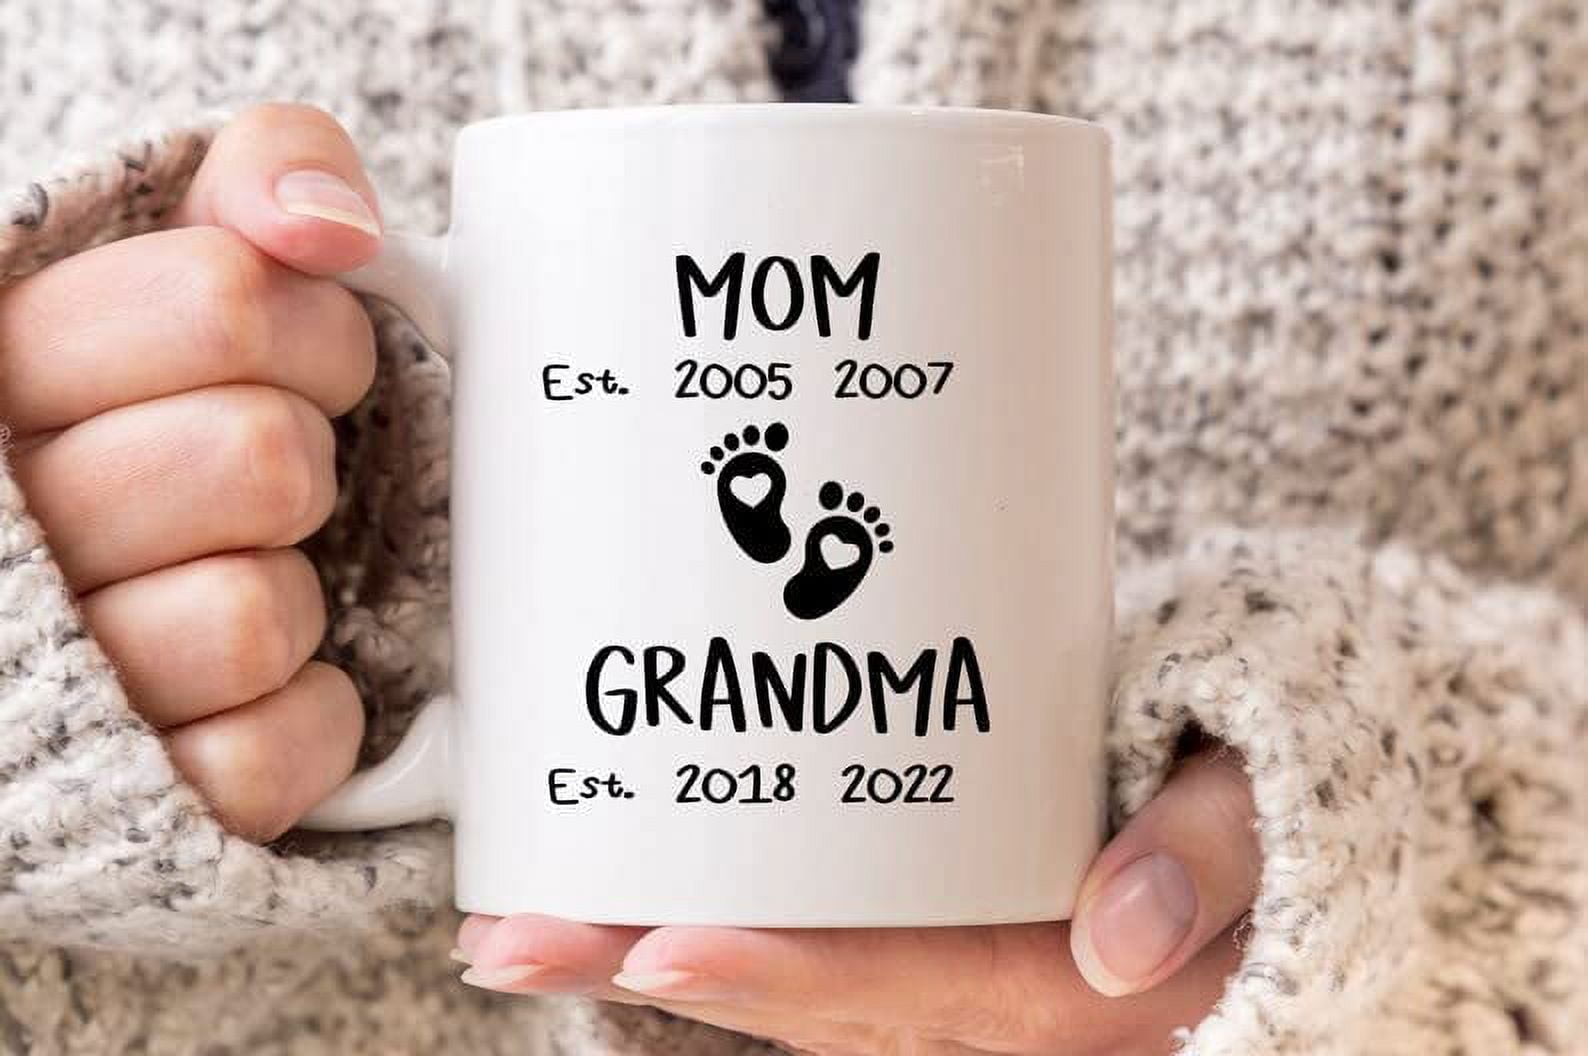 New Mom Mug Expecting Mommy to Be Gifts Baby Shower Gift Pregnancy Ann –  Cute But Rude